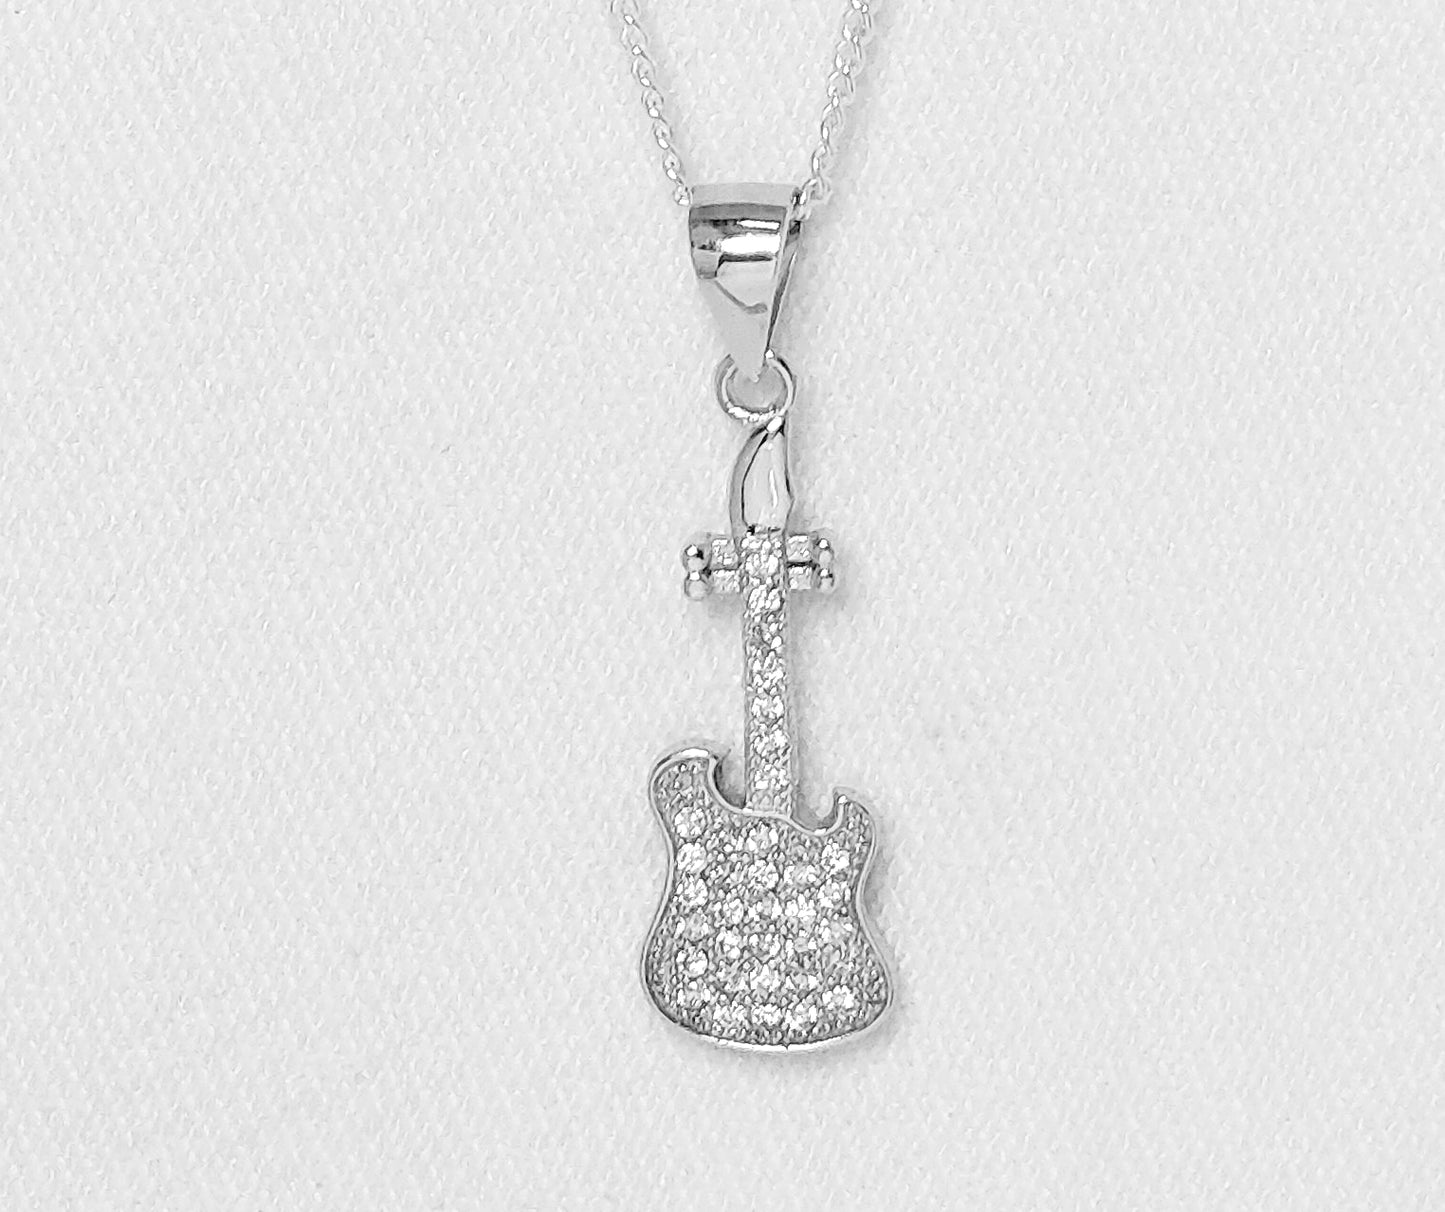 sterling silver guitar pendant with cubic zirconia stones.